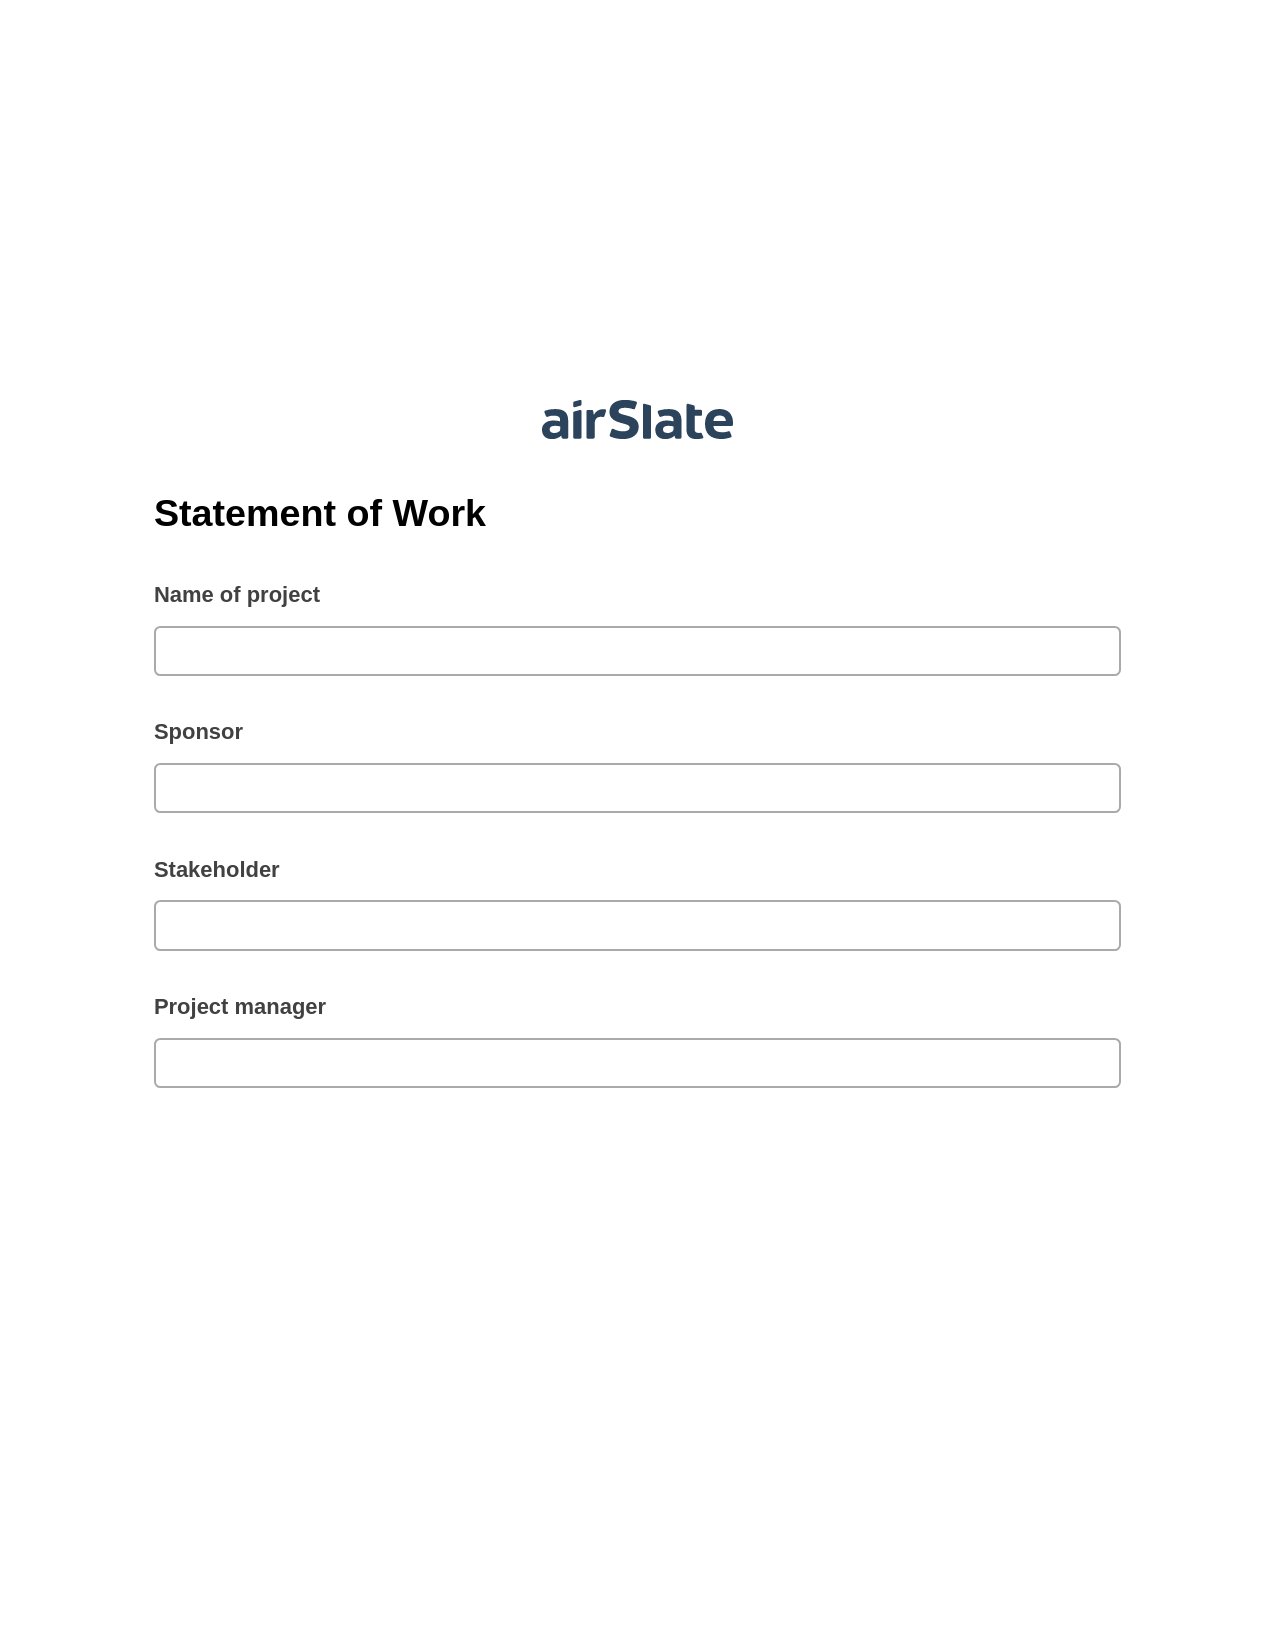 Statement of Work Pre-fill from Google Sheet Dropdown Options Bot, Create QuickBooks invoice Bot, OneDrive Bot